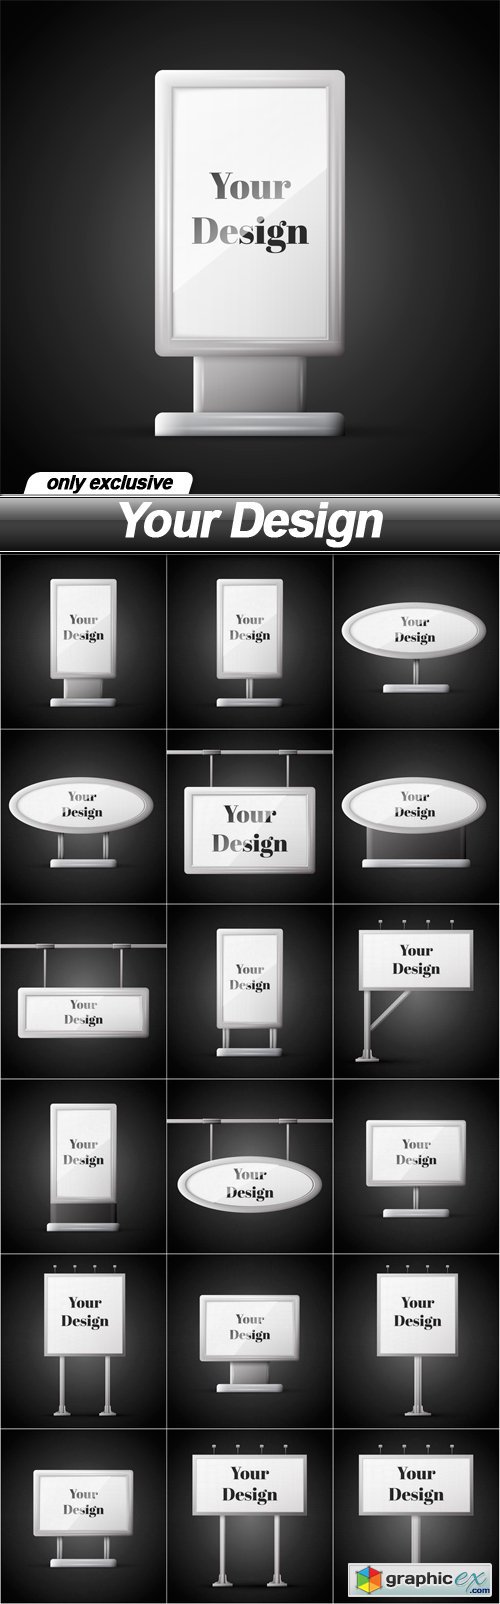  Your Design - 18 EPS 